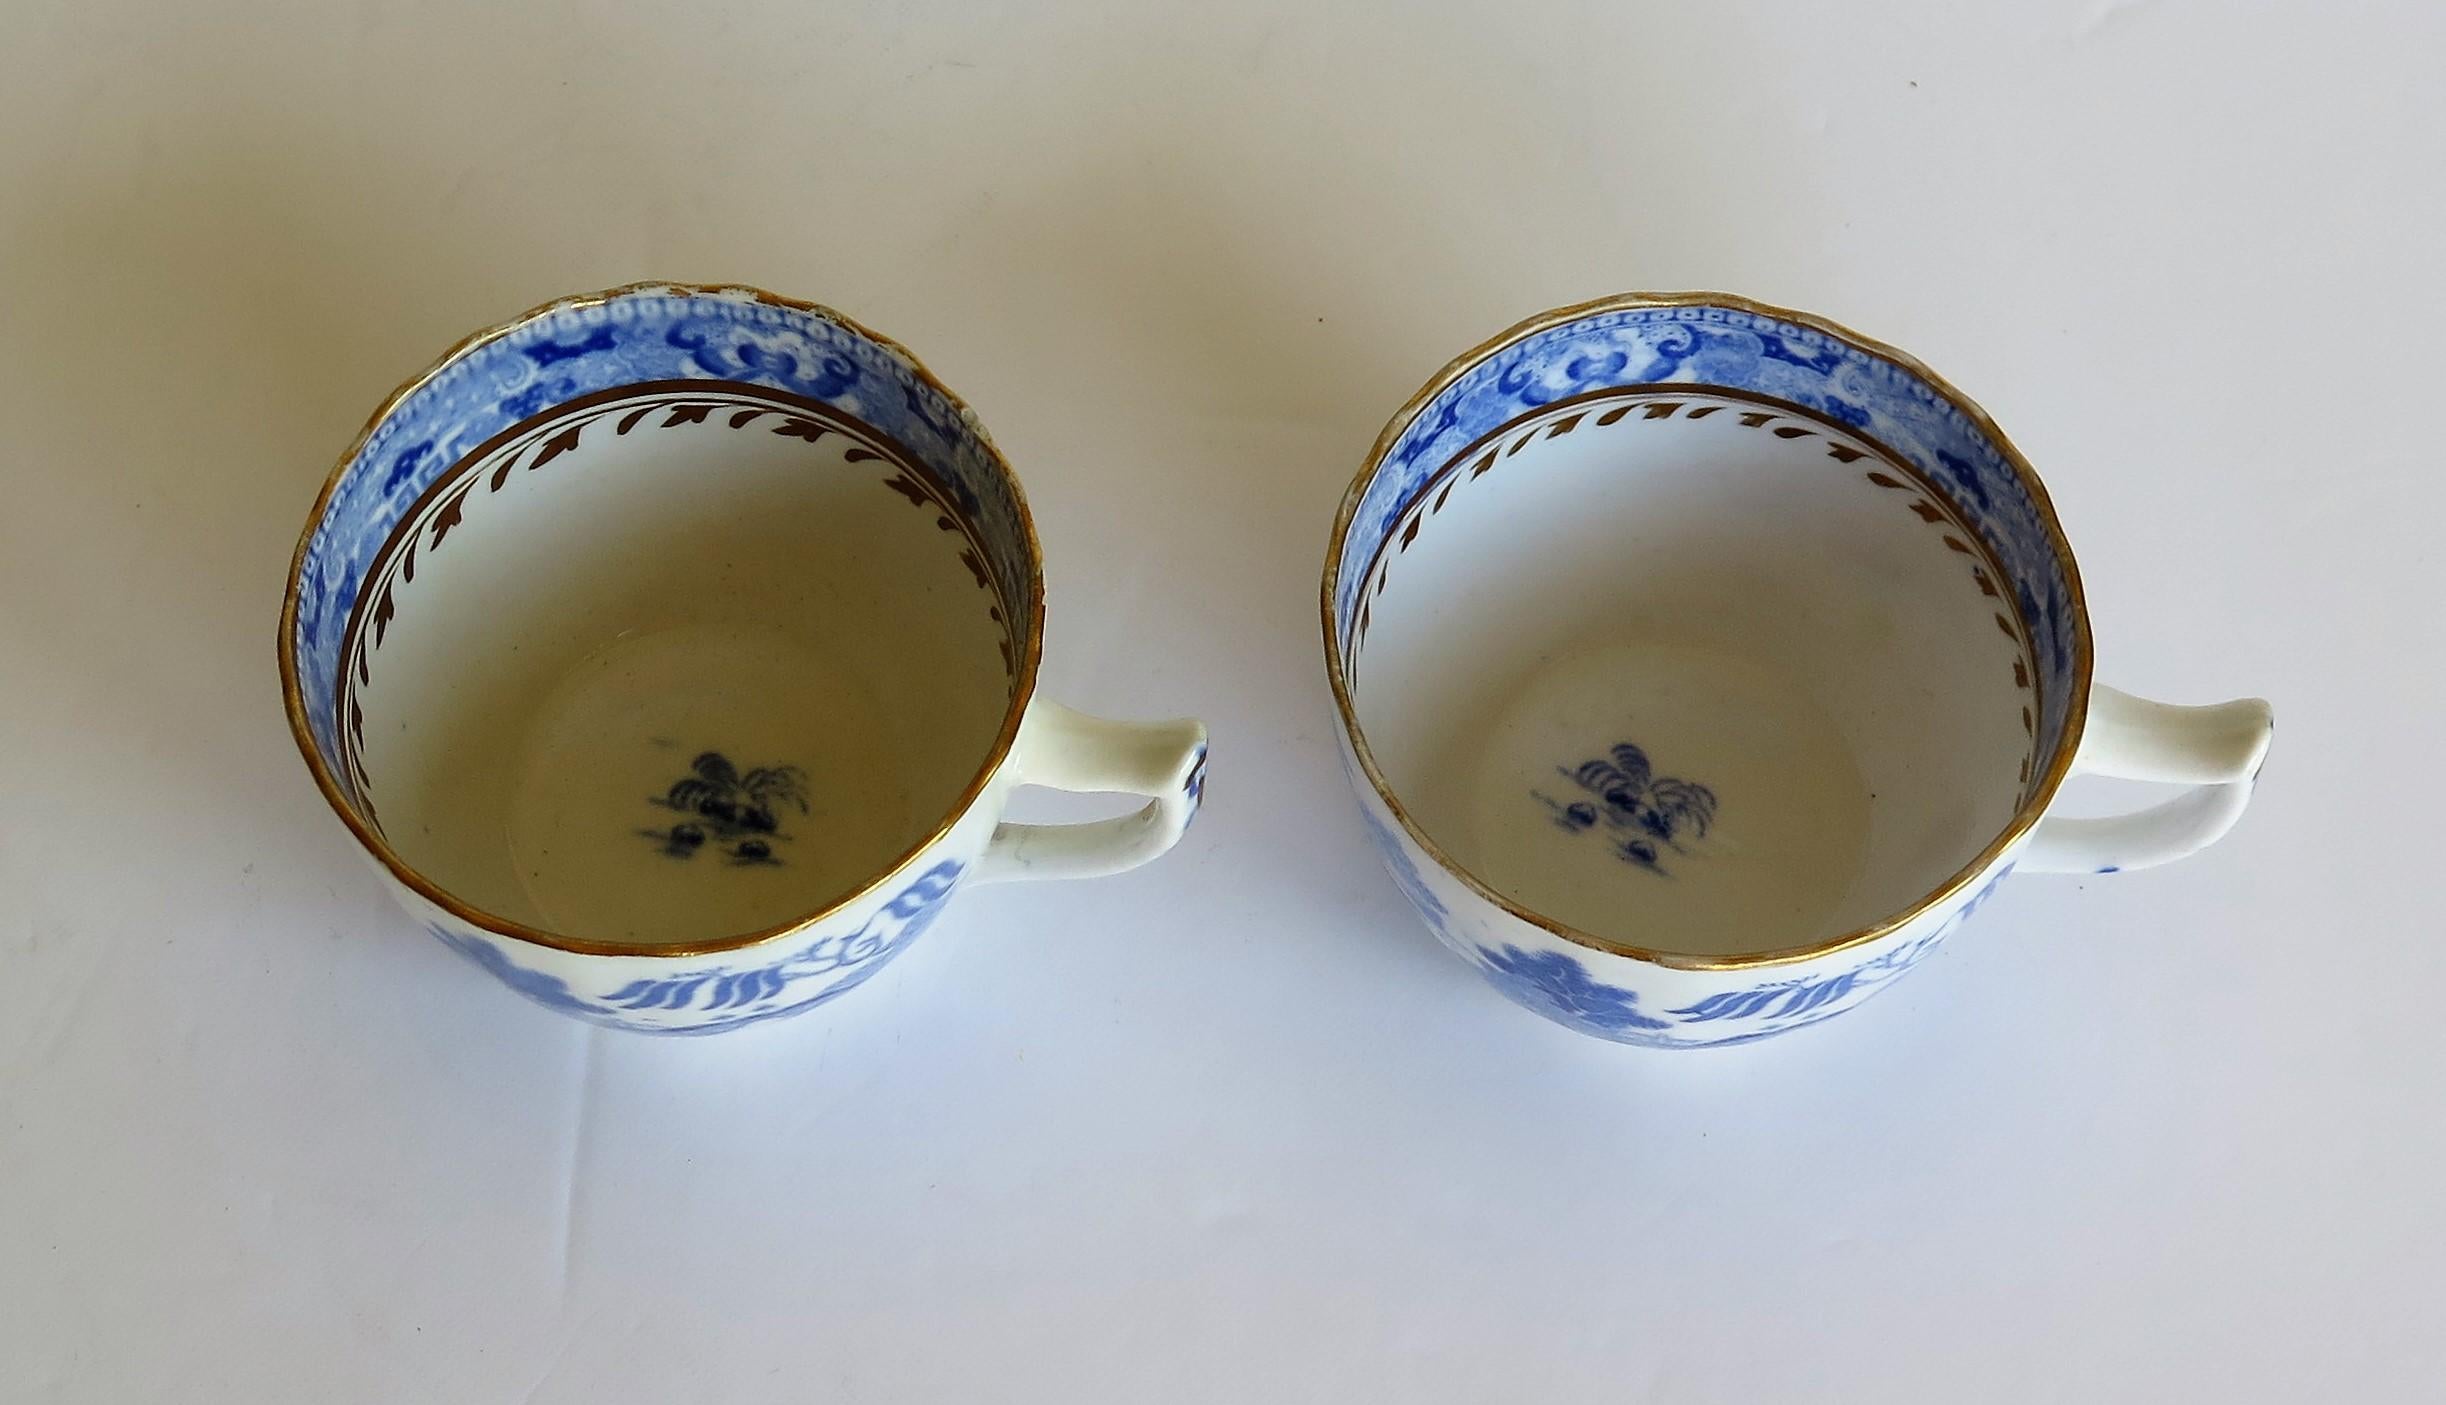 Miles Mason Porcelain Pair of Tea Cups Broseley Blue and White Pattern, Ca. 1805 For Sale 4